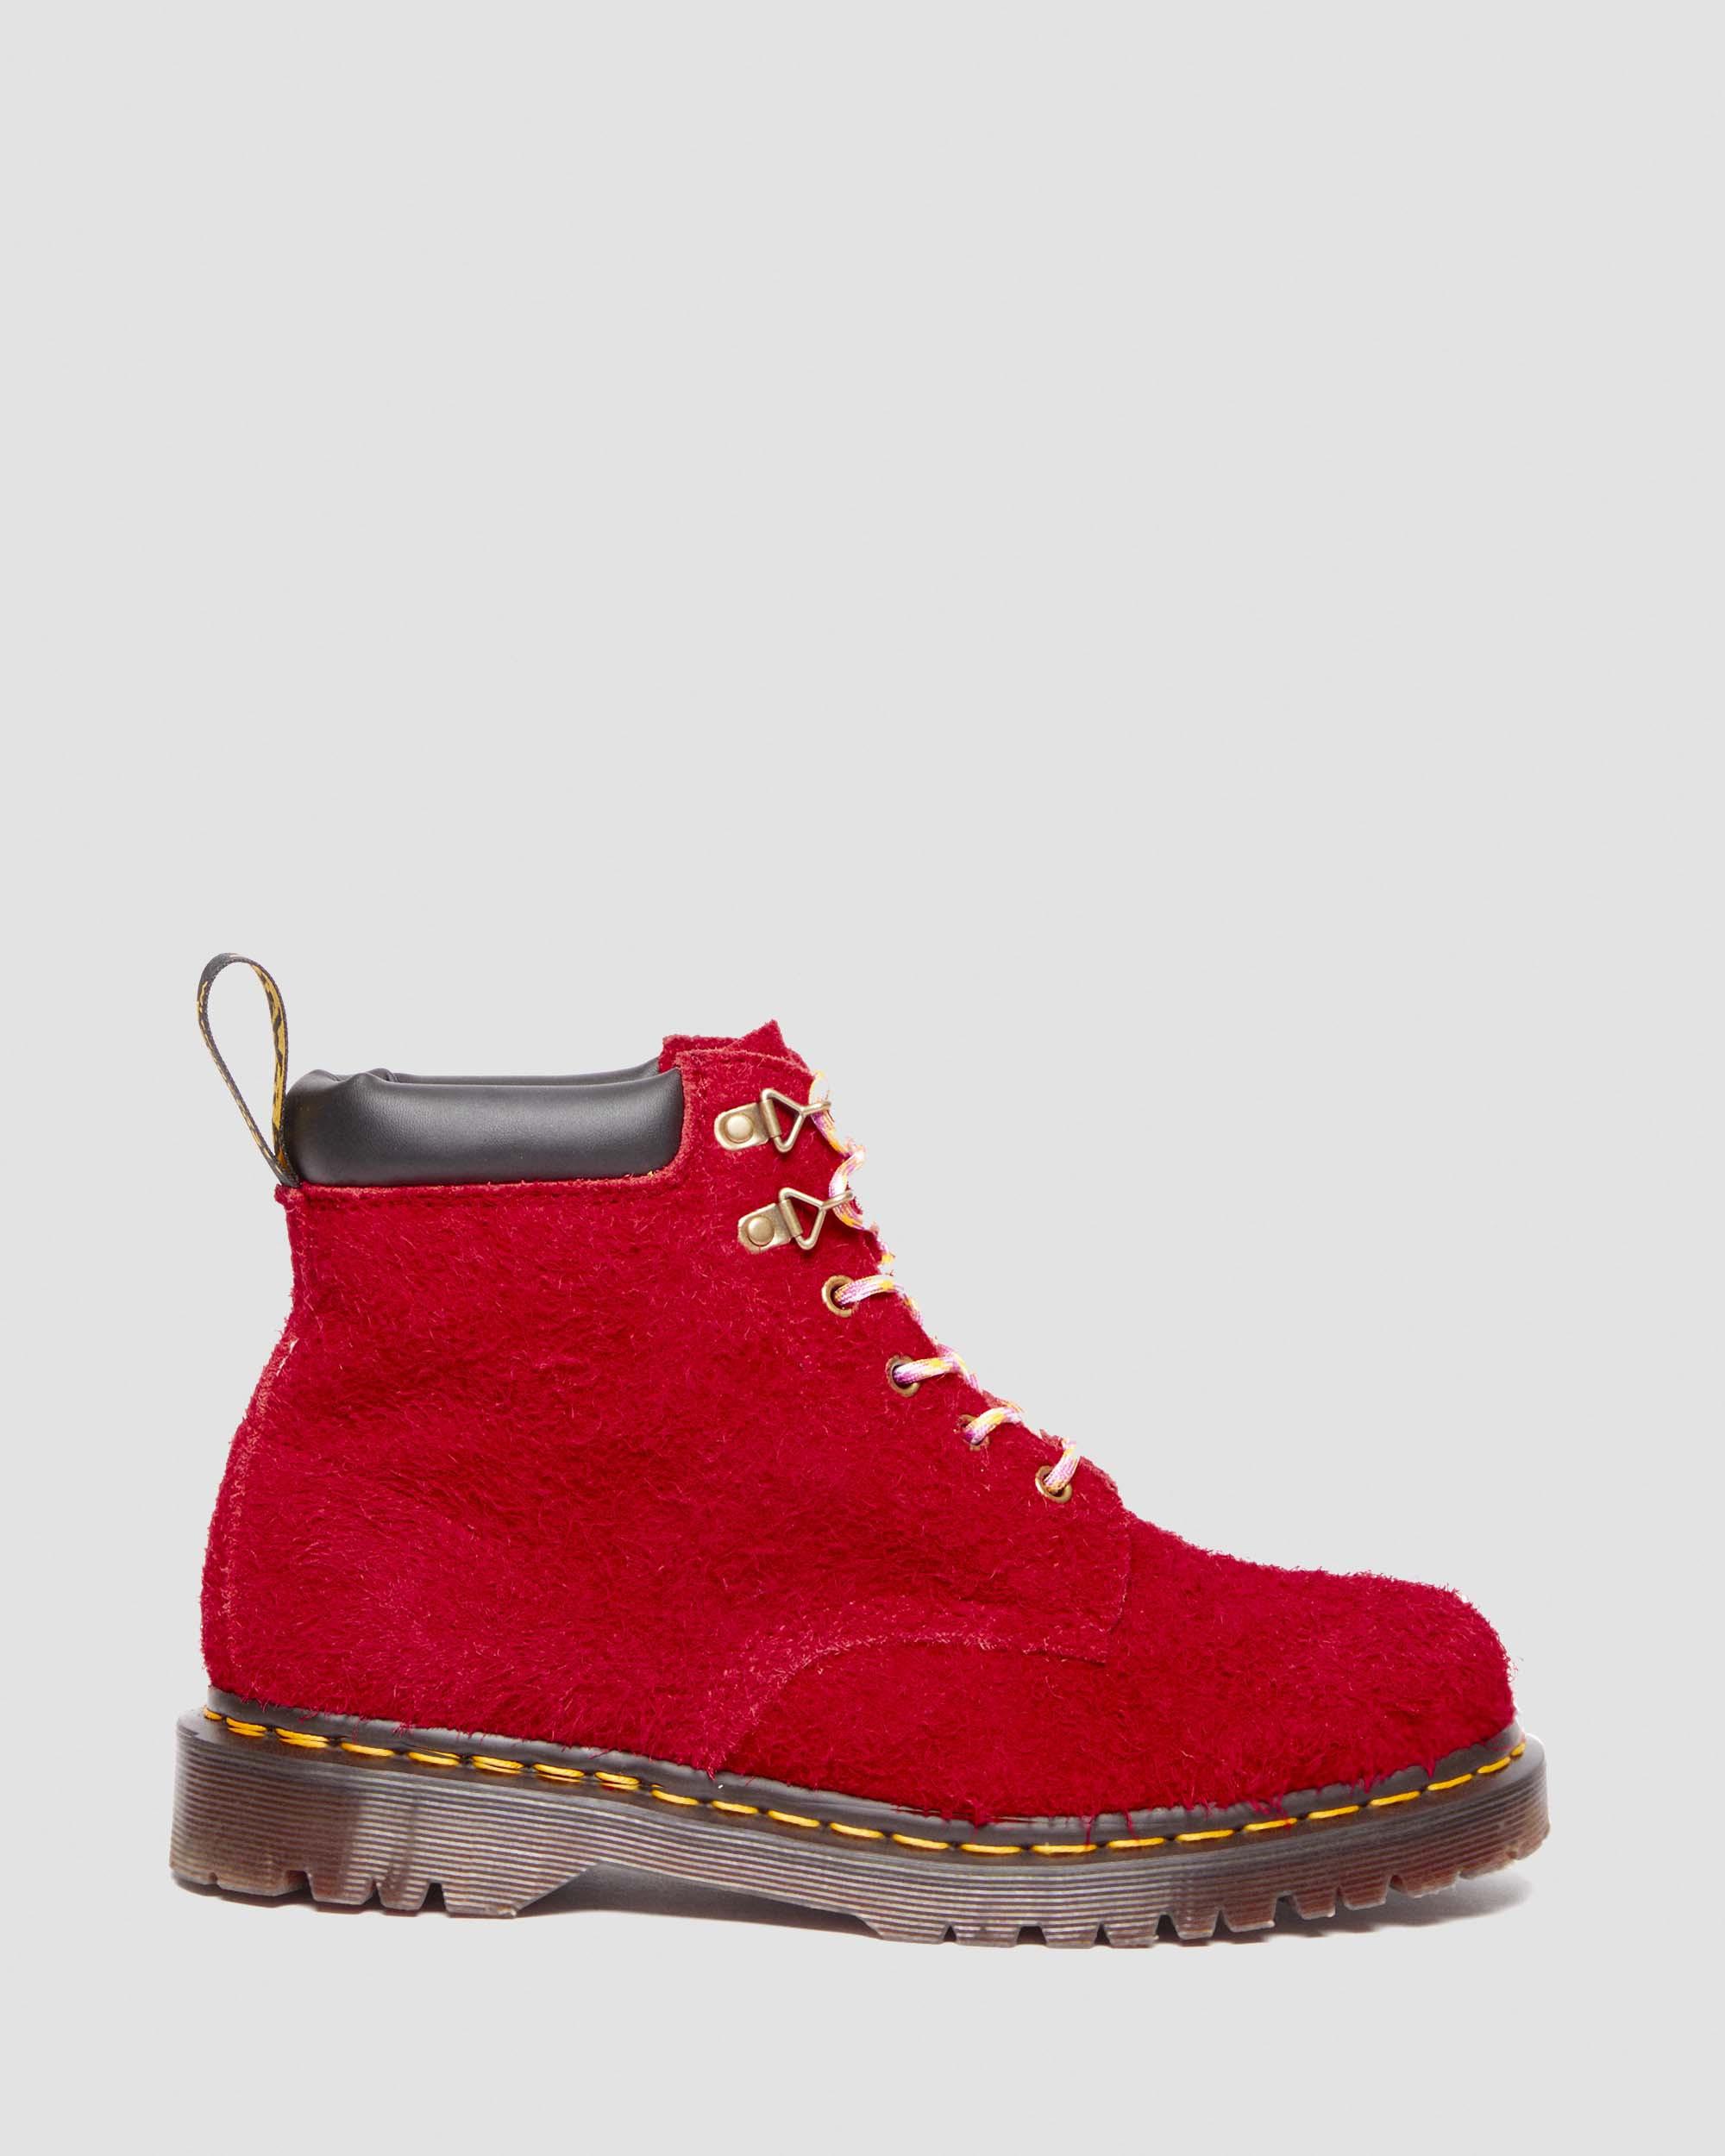 939 Ben Suede Padded Collar Lace Up Boots in DMS RED